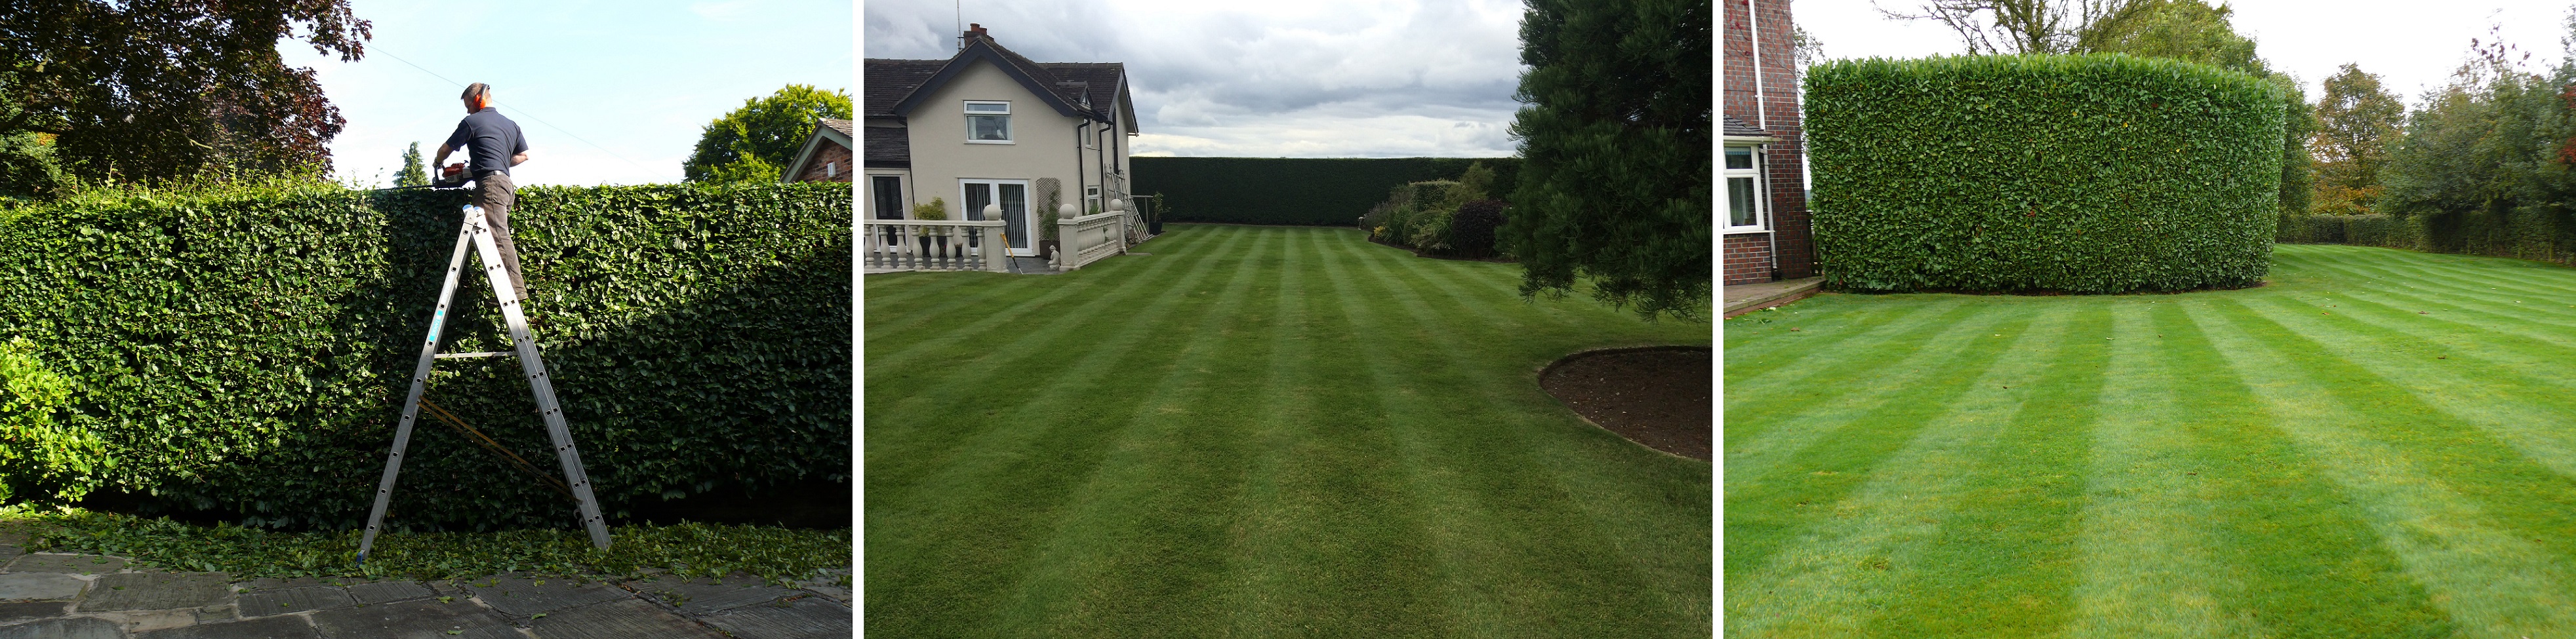 Hedge Cutting in Knutsford, Cheshire